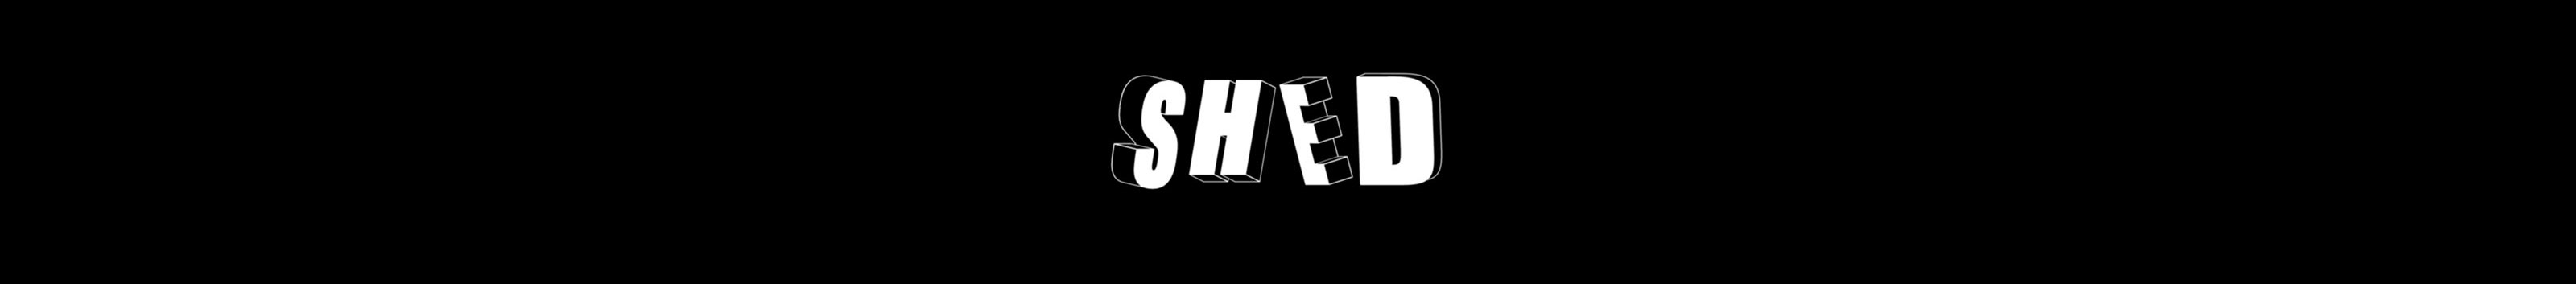 SHED Inc's profile banner